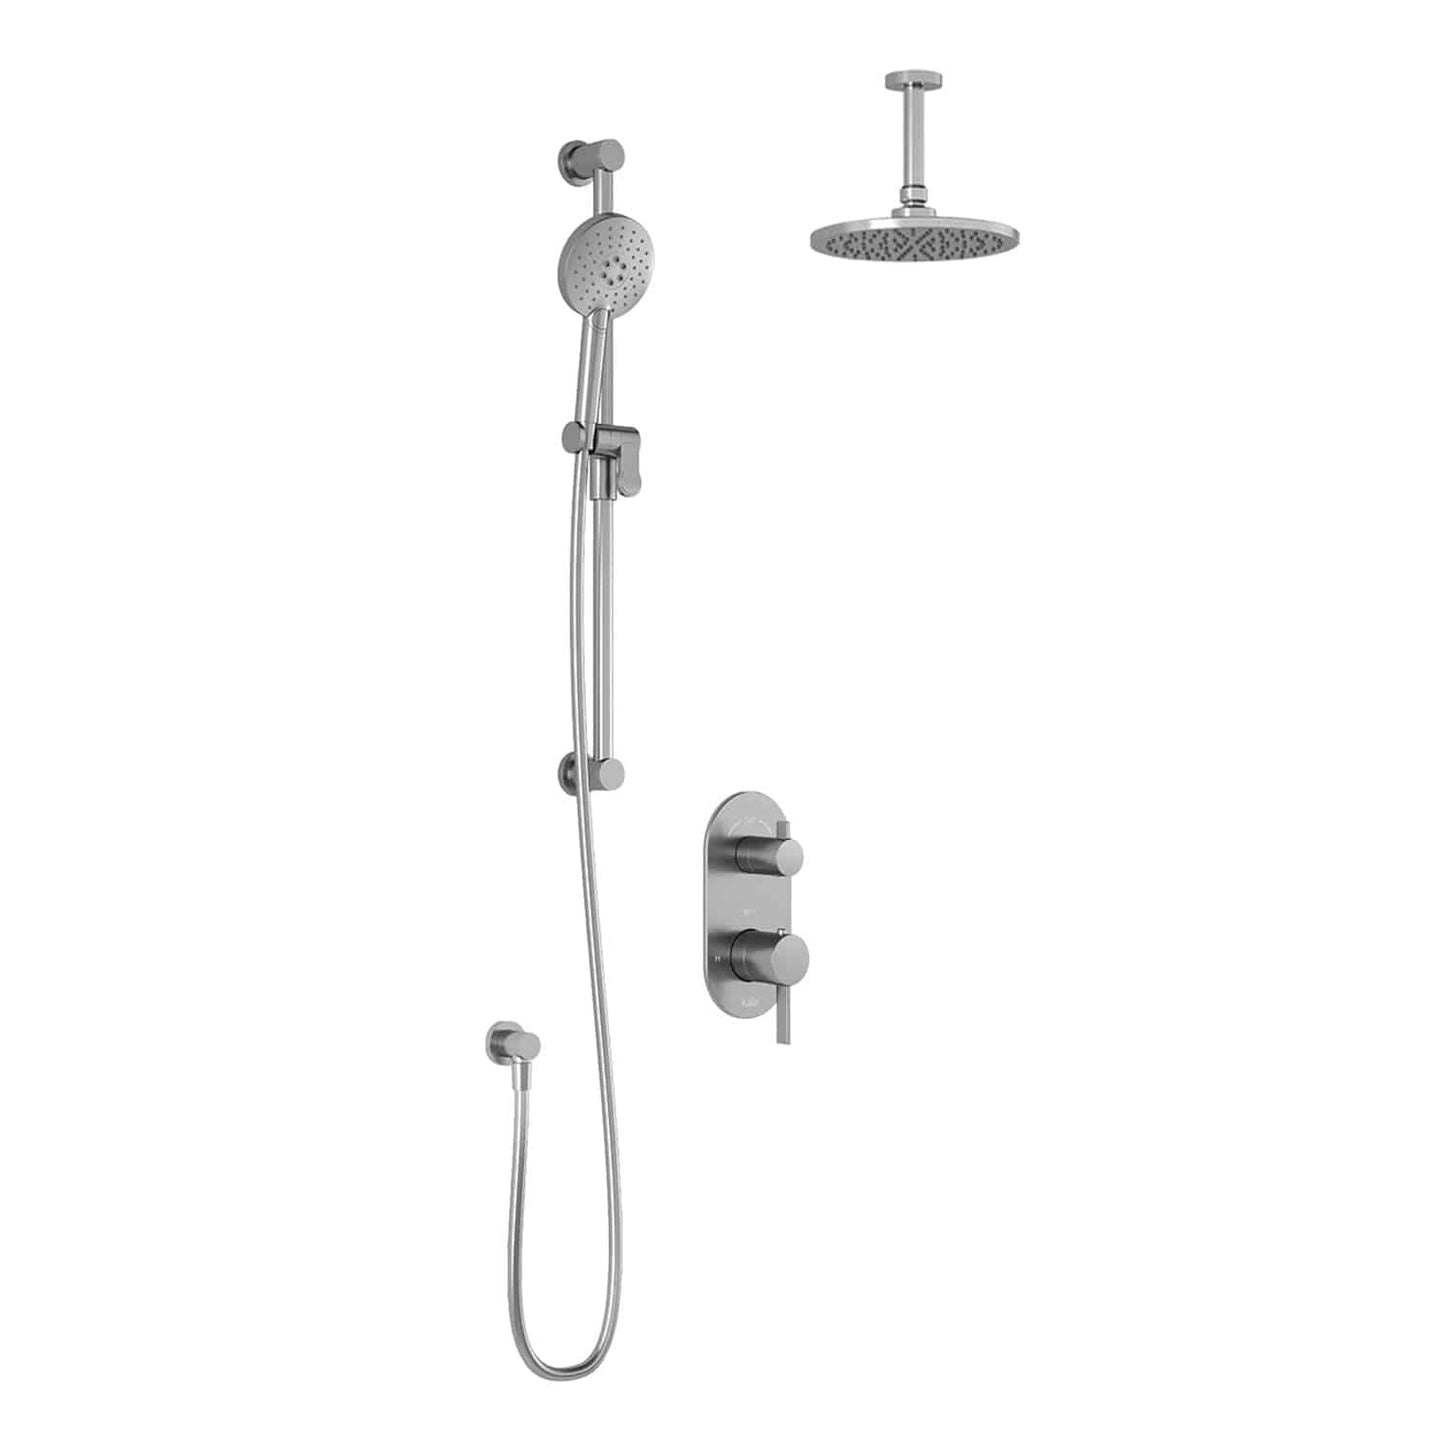 Kalia RoundOne TD2 (Valve Not Included) AQUATONIK T/P with Diverter Shower System with Vertical Ceiling Arm- Chrome